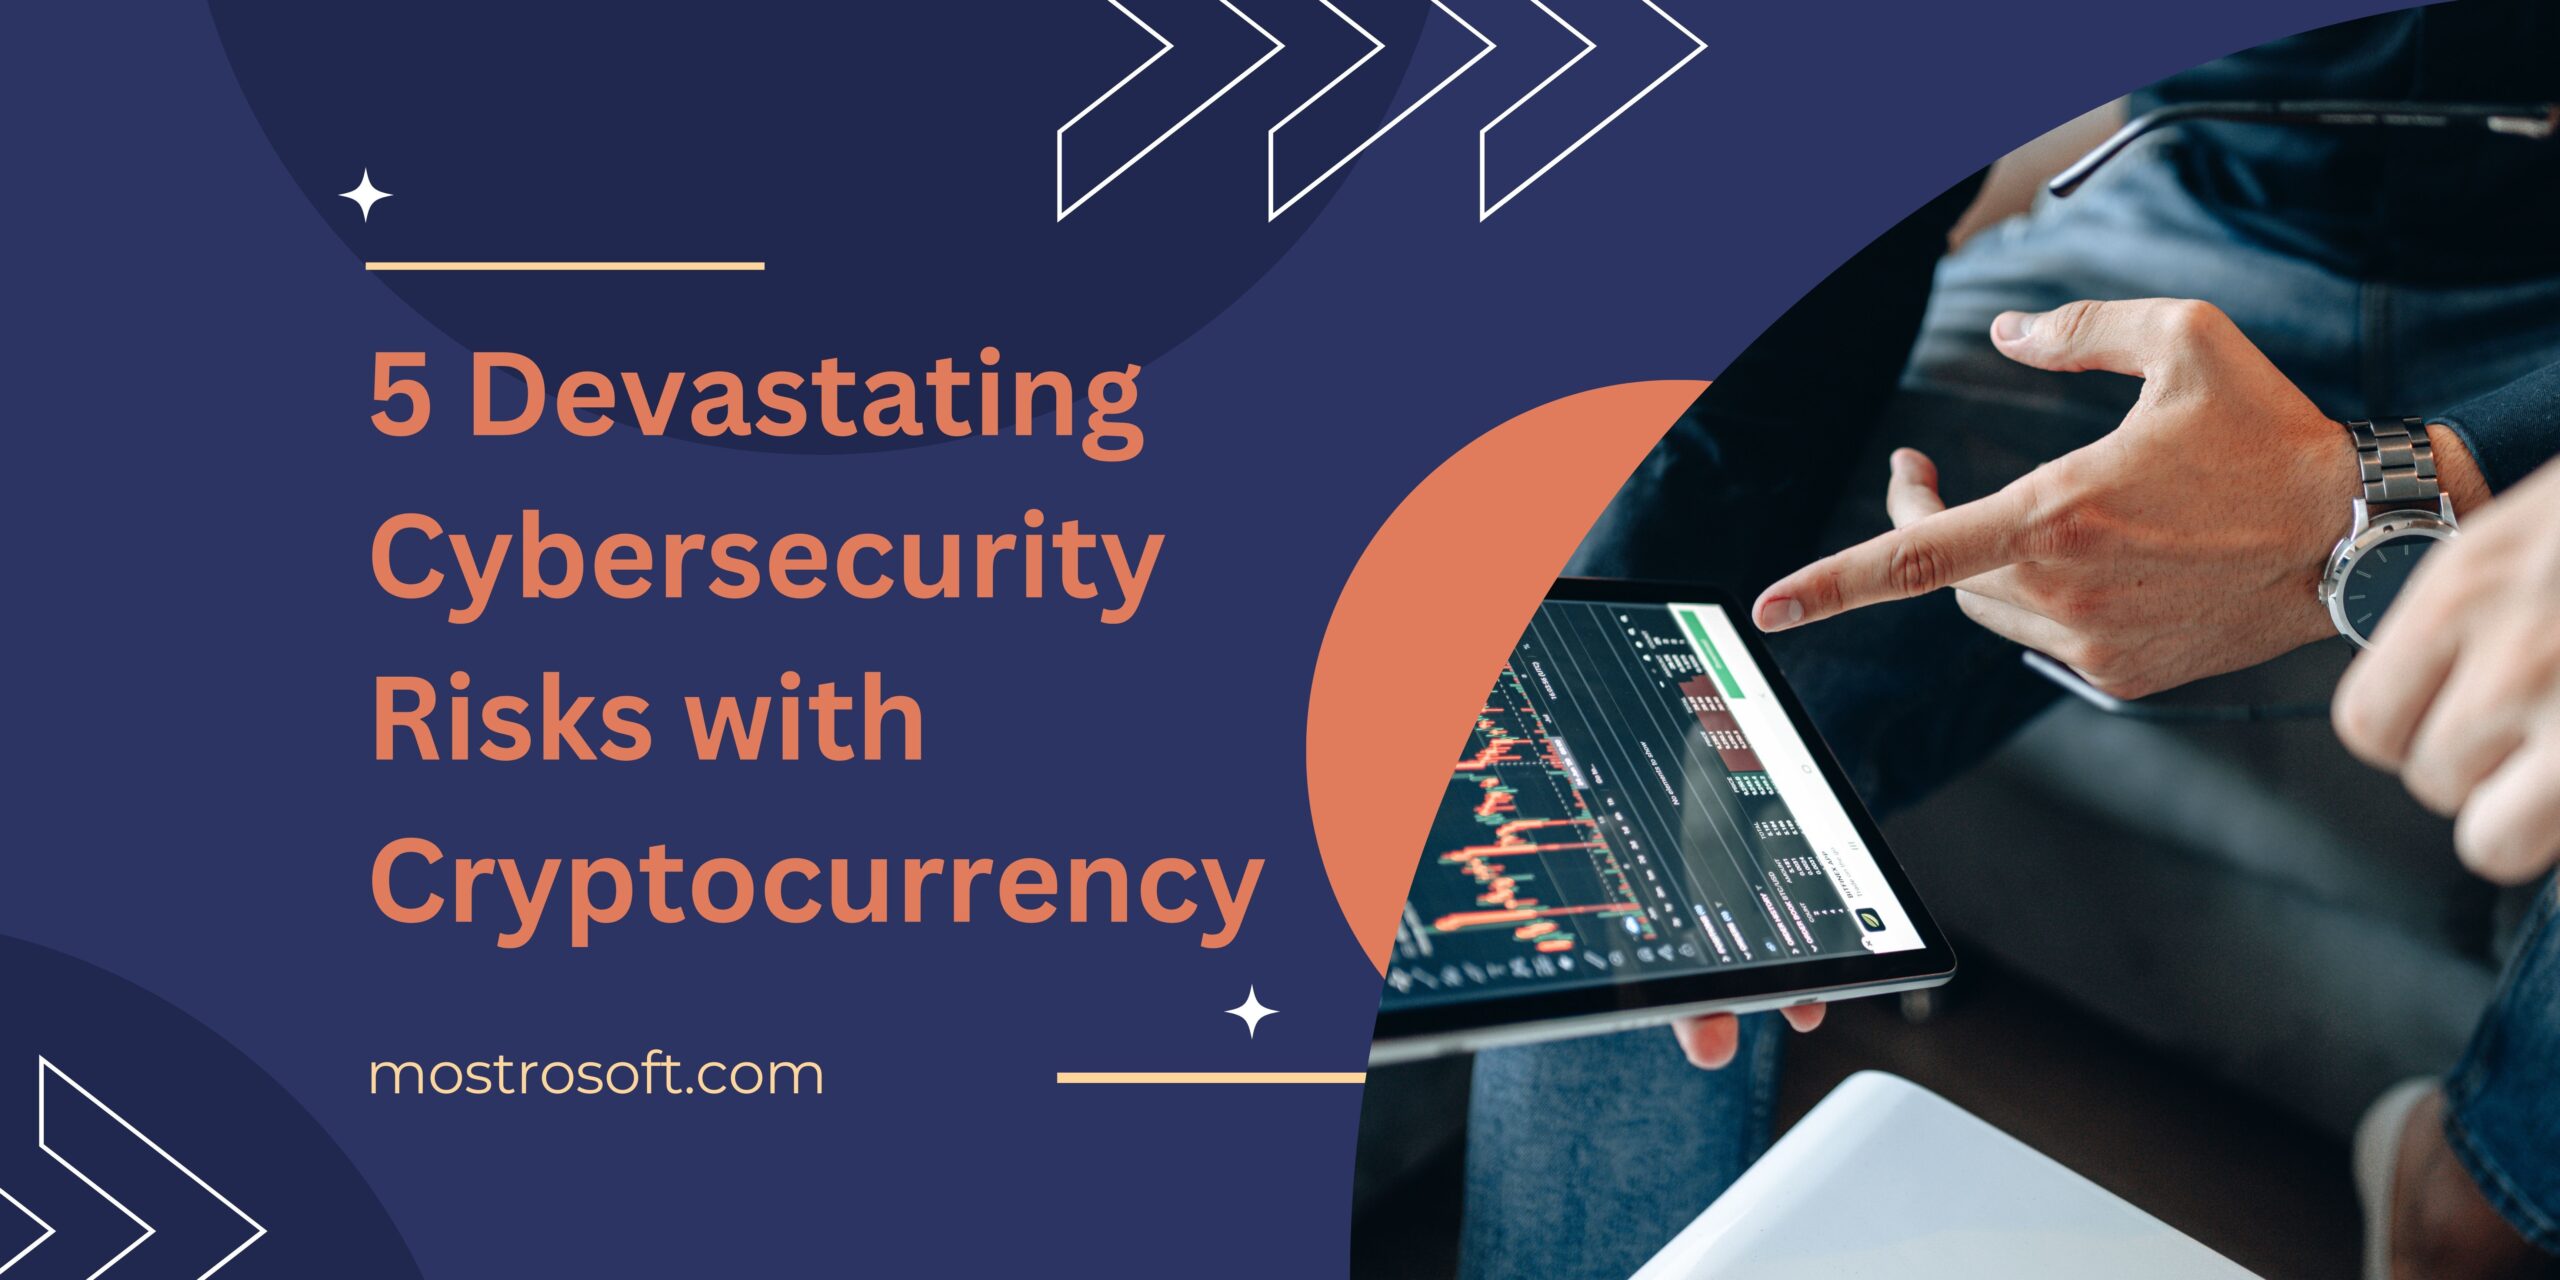 cybersecurity and cryptocurrency